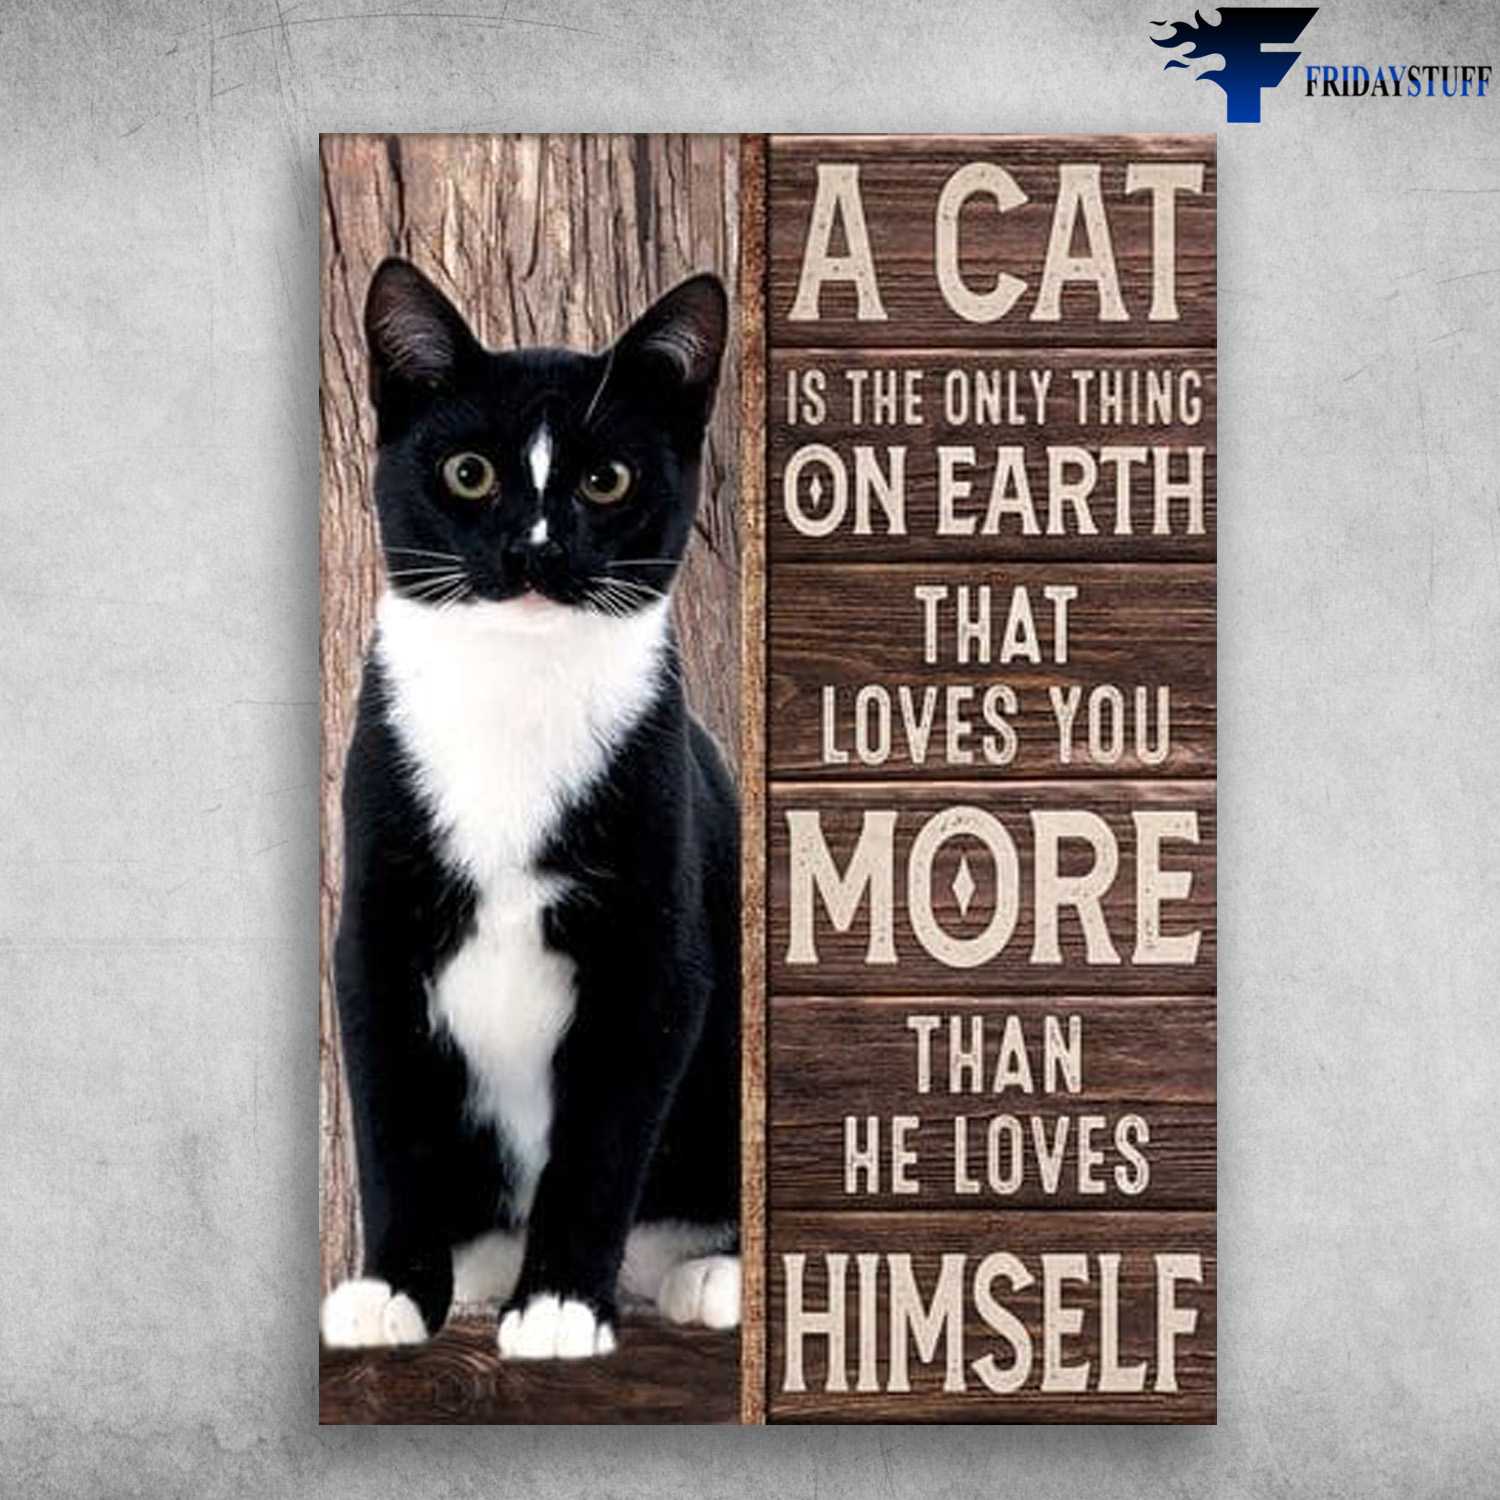 Tuxedo Cat Poster, Tuxedo Cat, A Cat Is The Only Thing On Earth, That Loves You More Than He Loves Himself